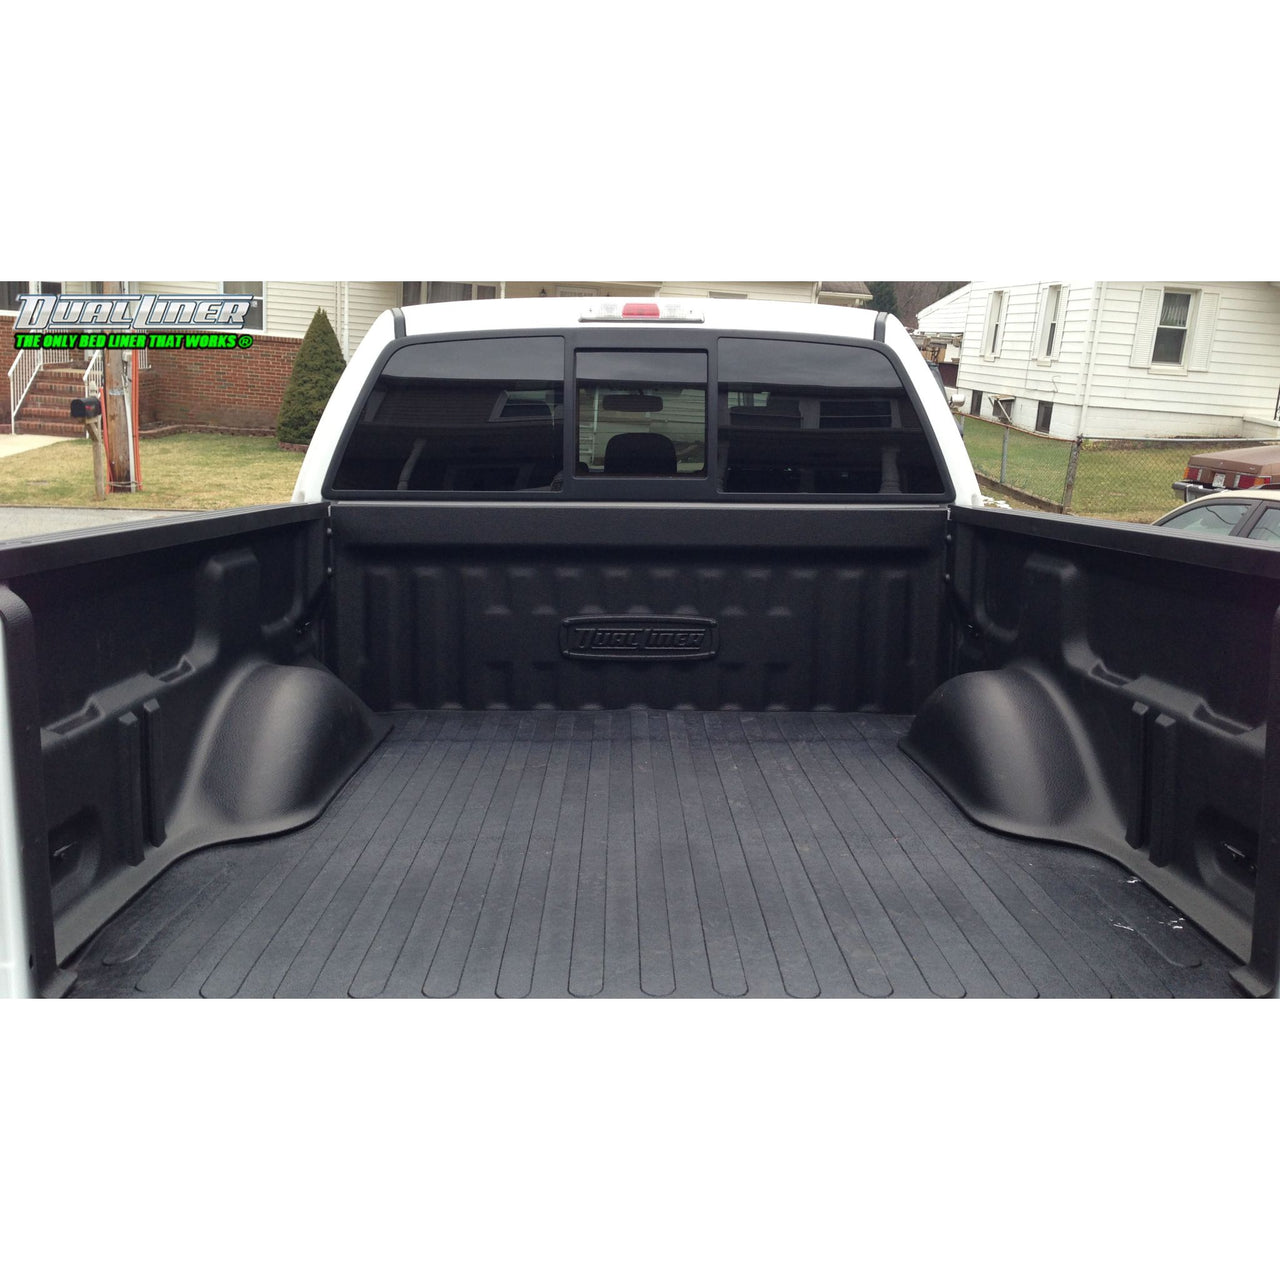 DualLiner 2004 to 2014 F-150 - Short 5.5' Bed